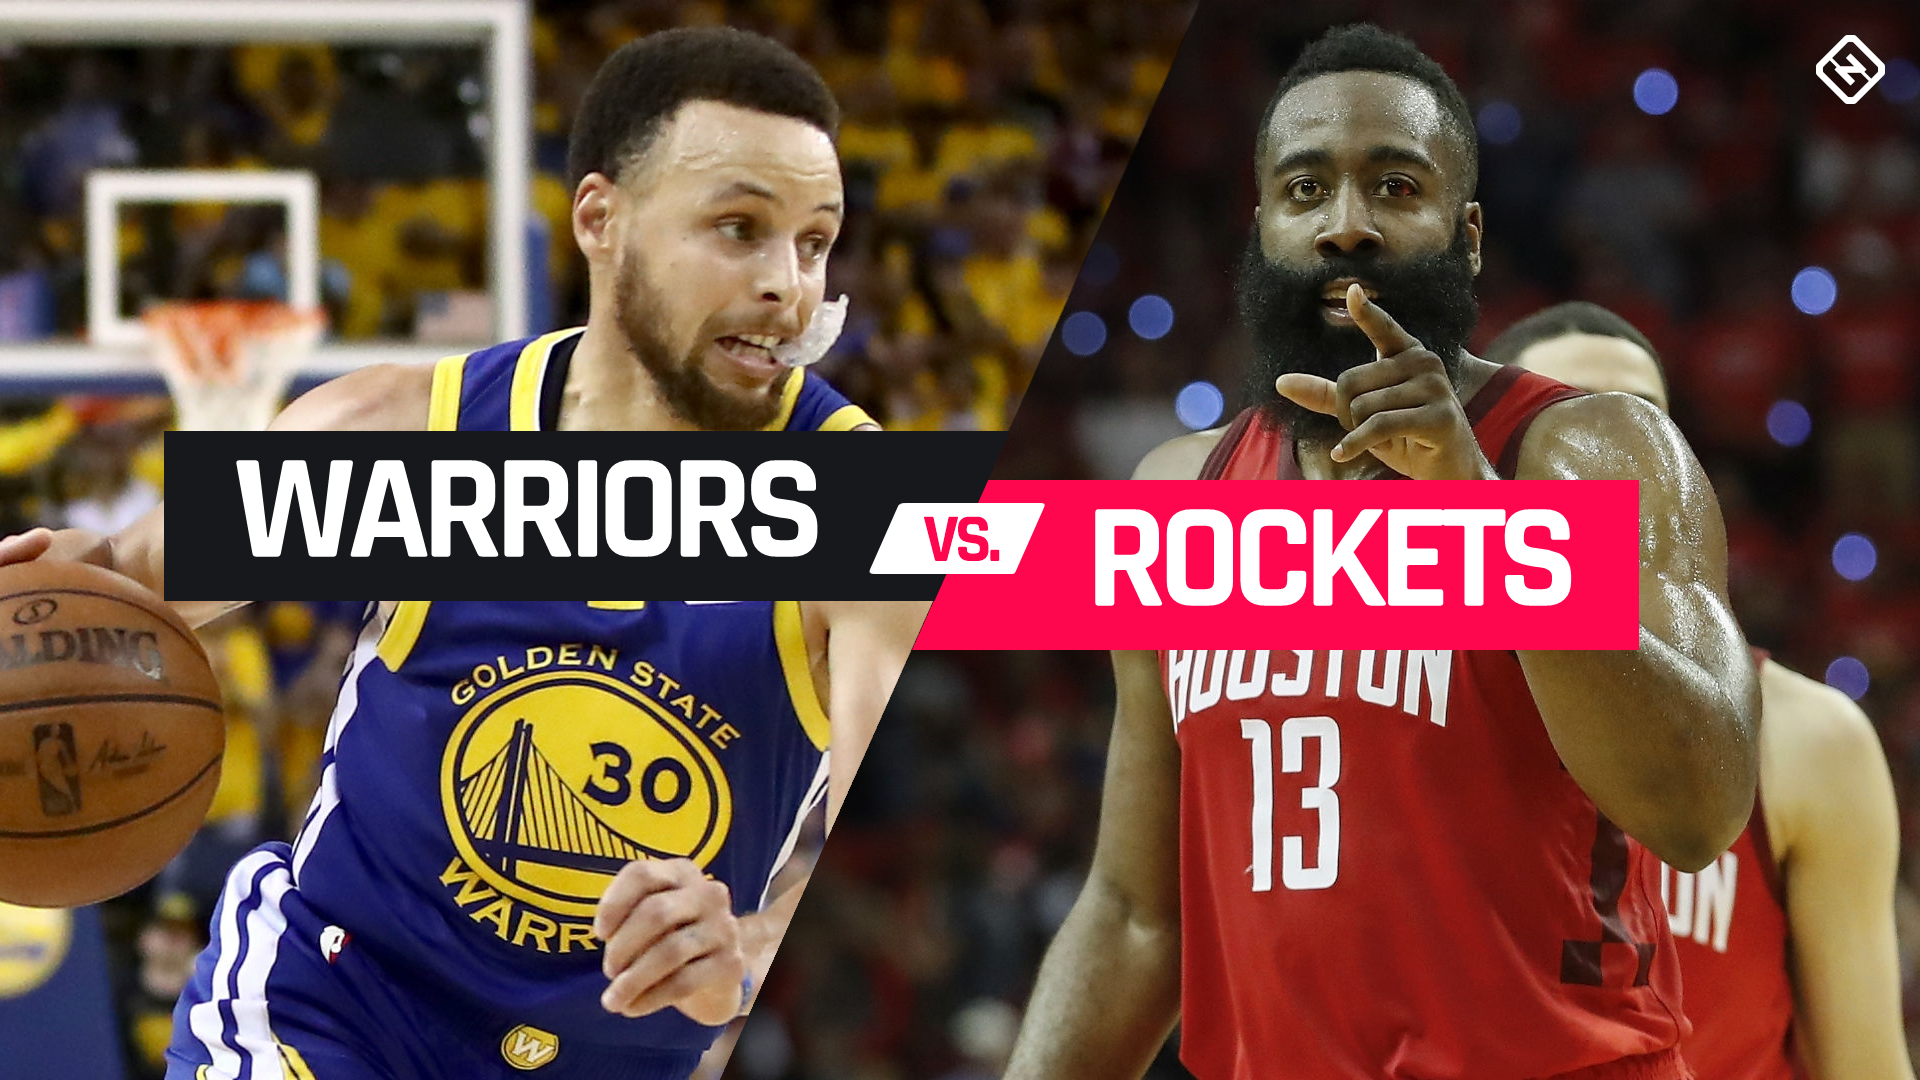 Warriors vs. Rockets: Live score, Game 6 updates, highlights from 2019